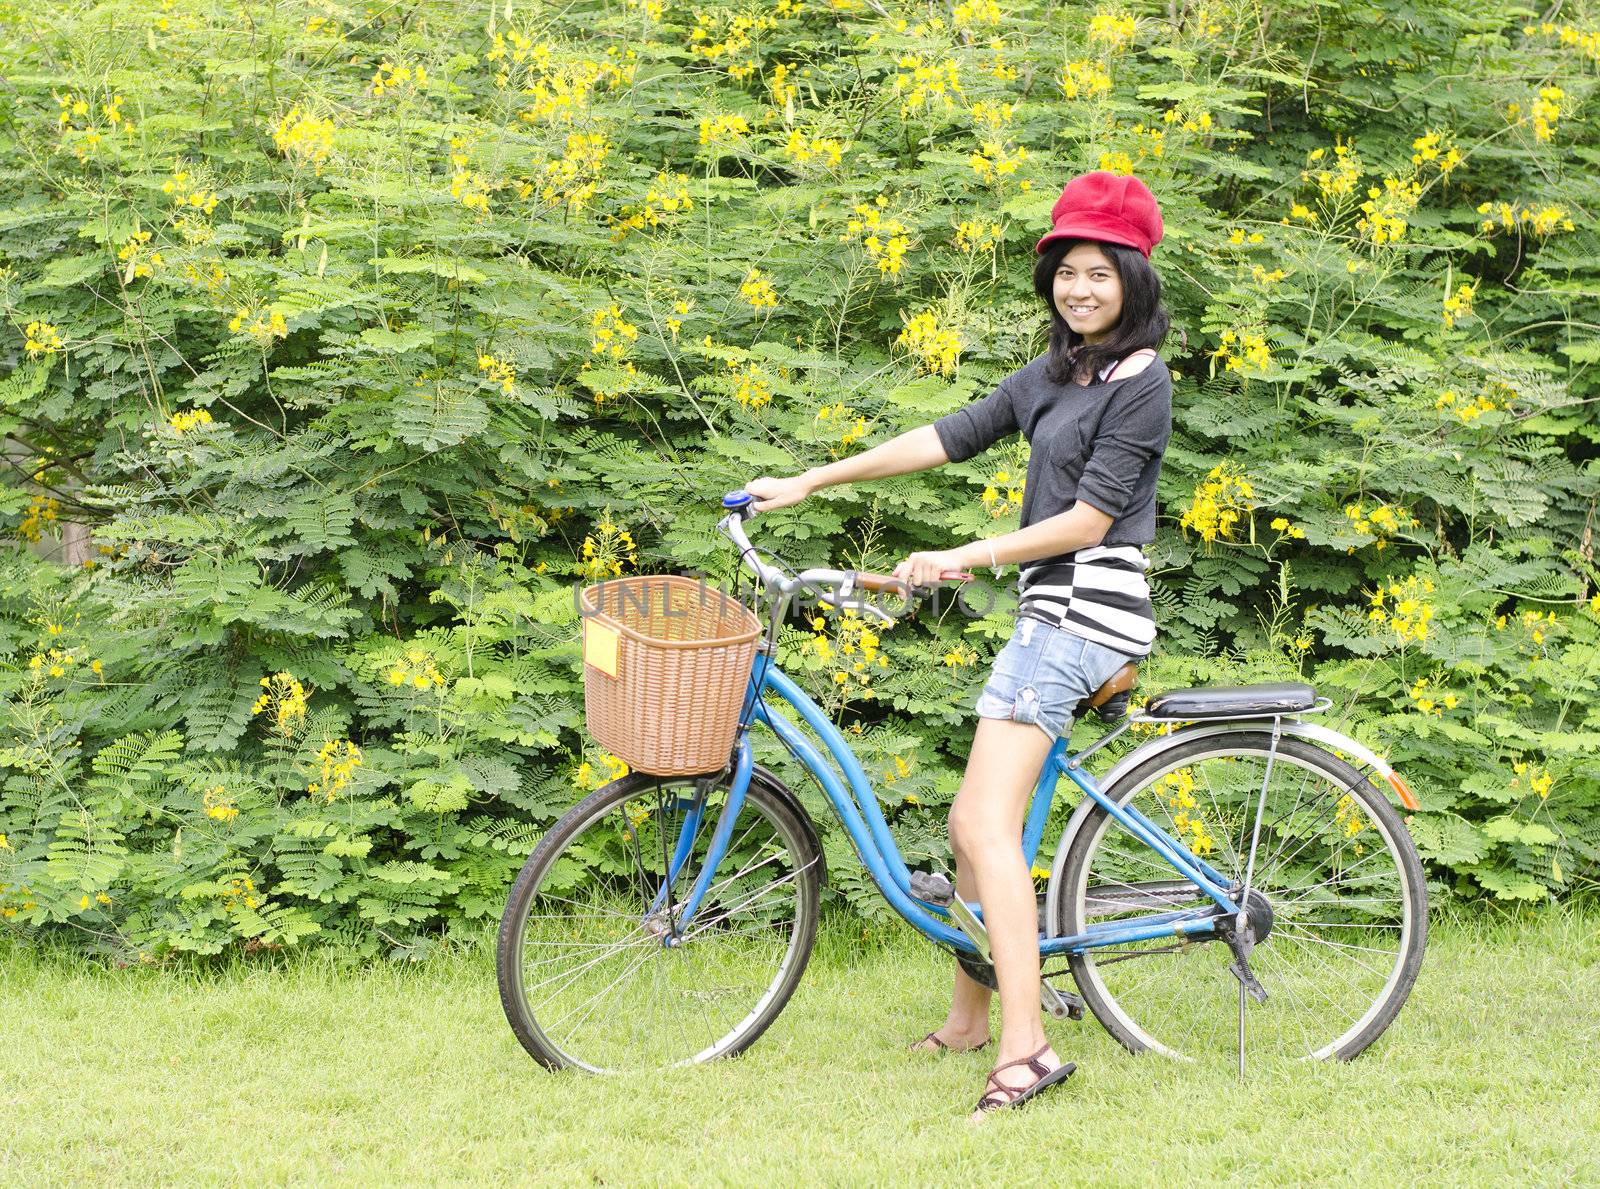 Portrait of an happy smiling girl riding a bicycle in the park